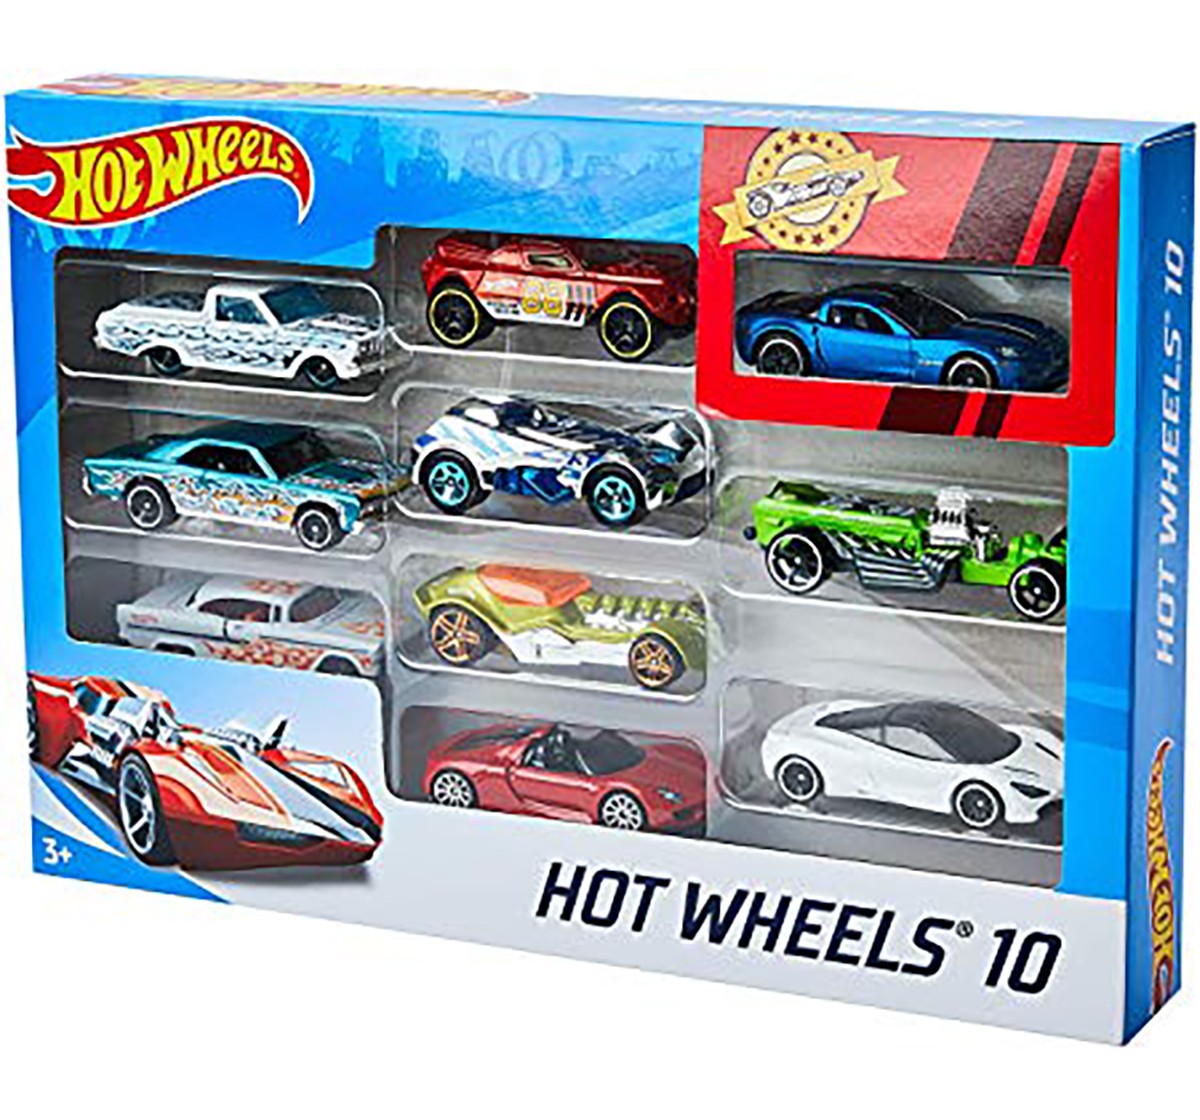 Hot Wheels Die Cast Cars Pack of 10 Vehicles for Kids age 3Y+ 